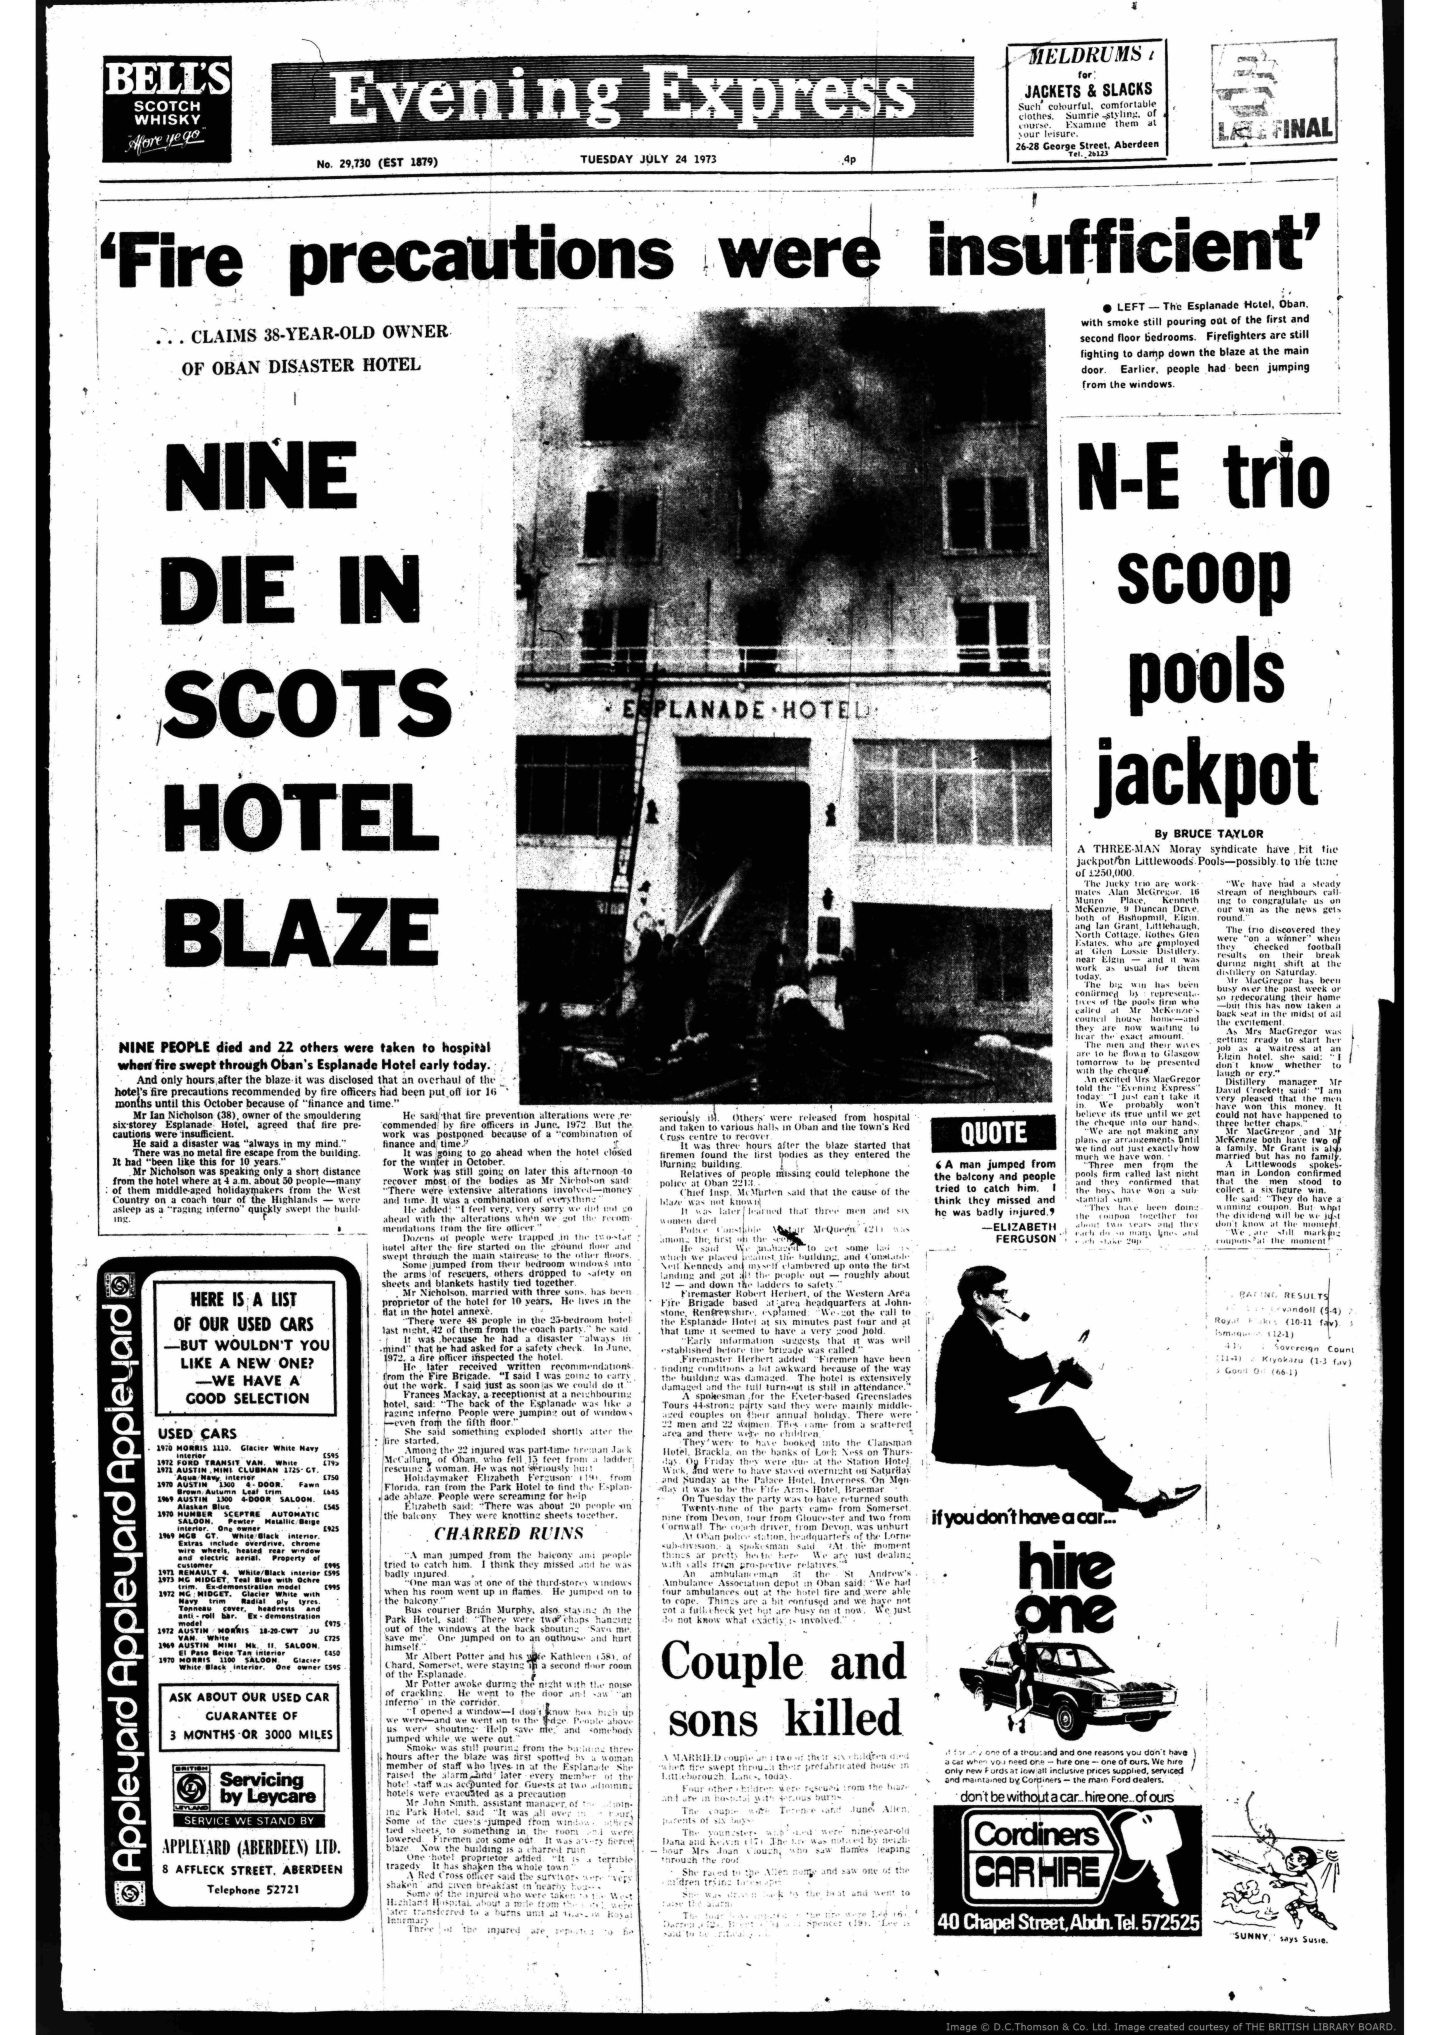 Evening Express newspaper clipping from July 24 1973 covering the fire at the hotel in Oban.